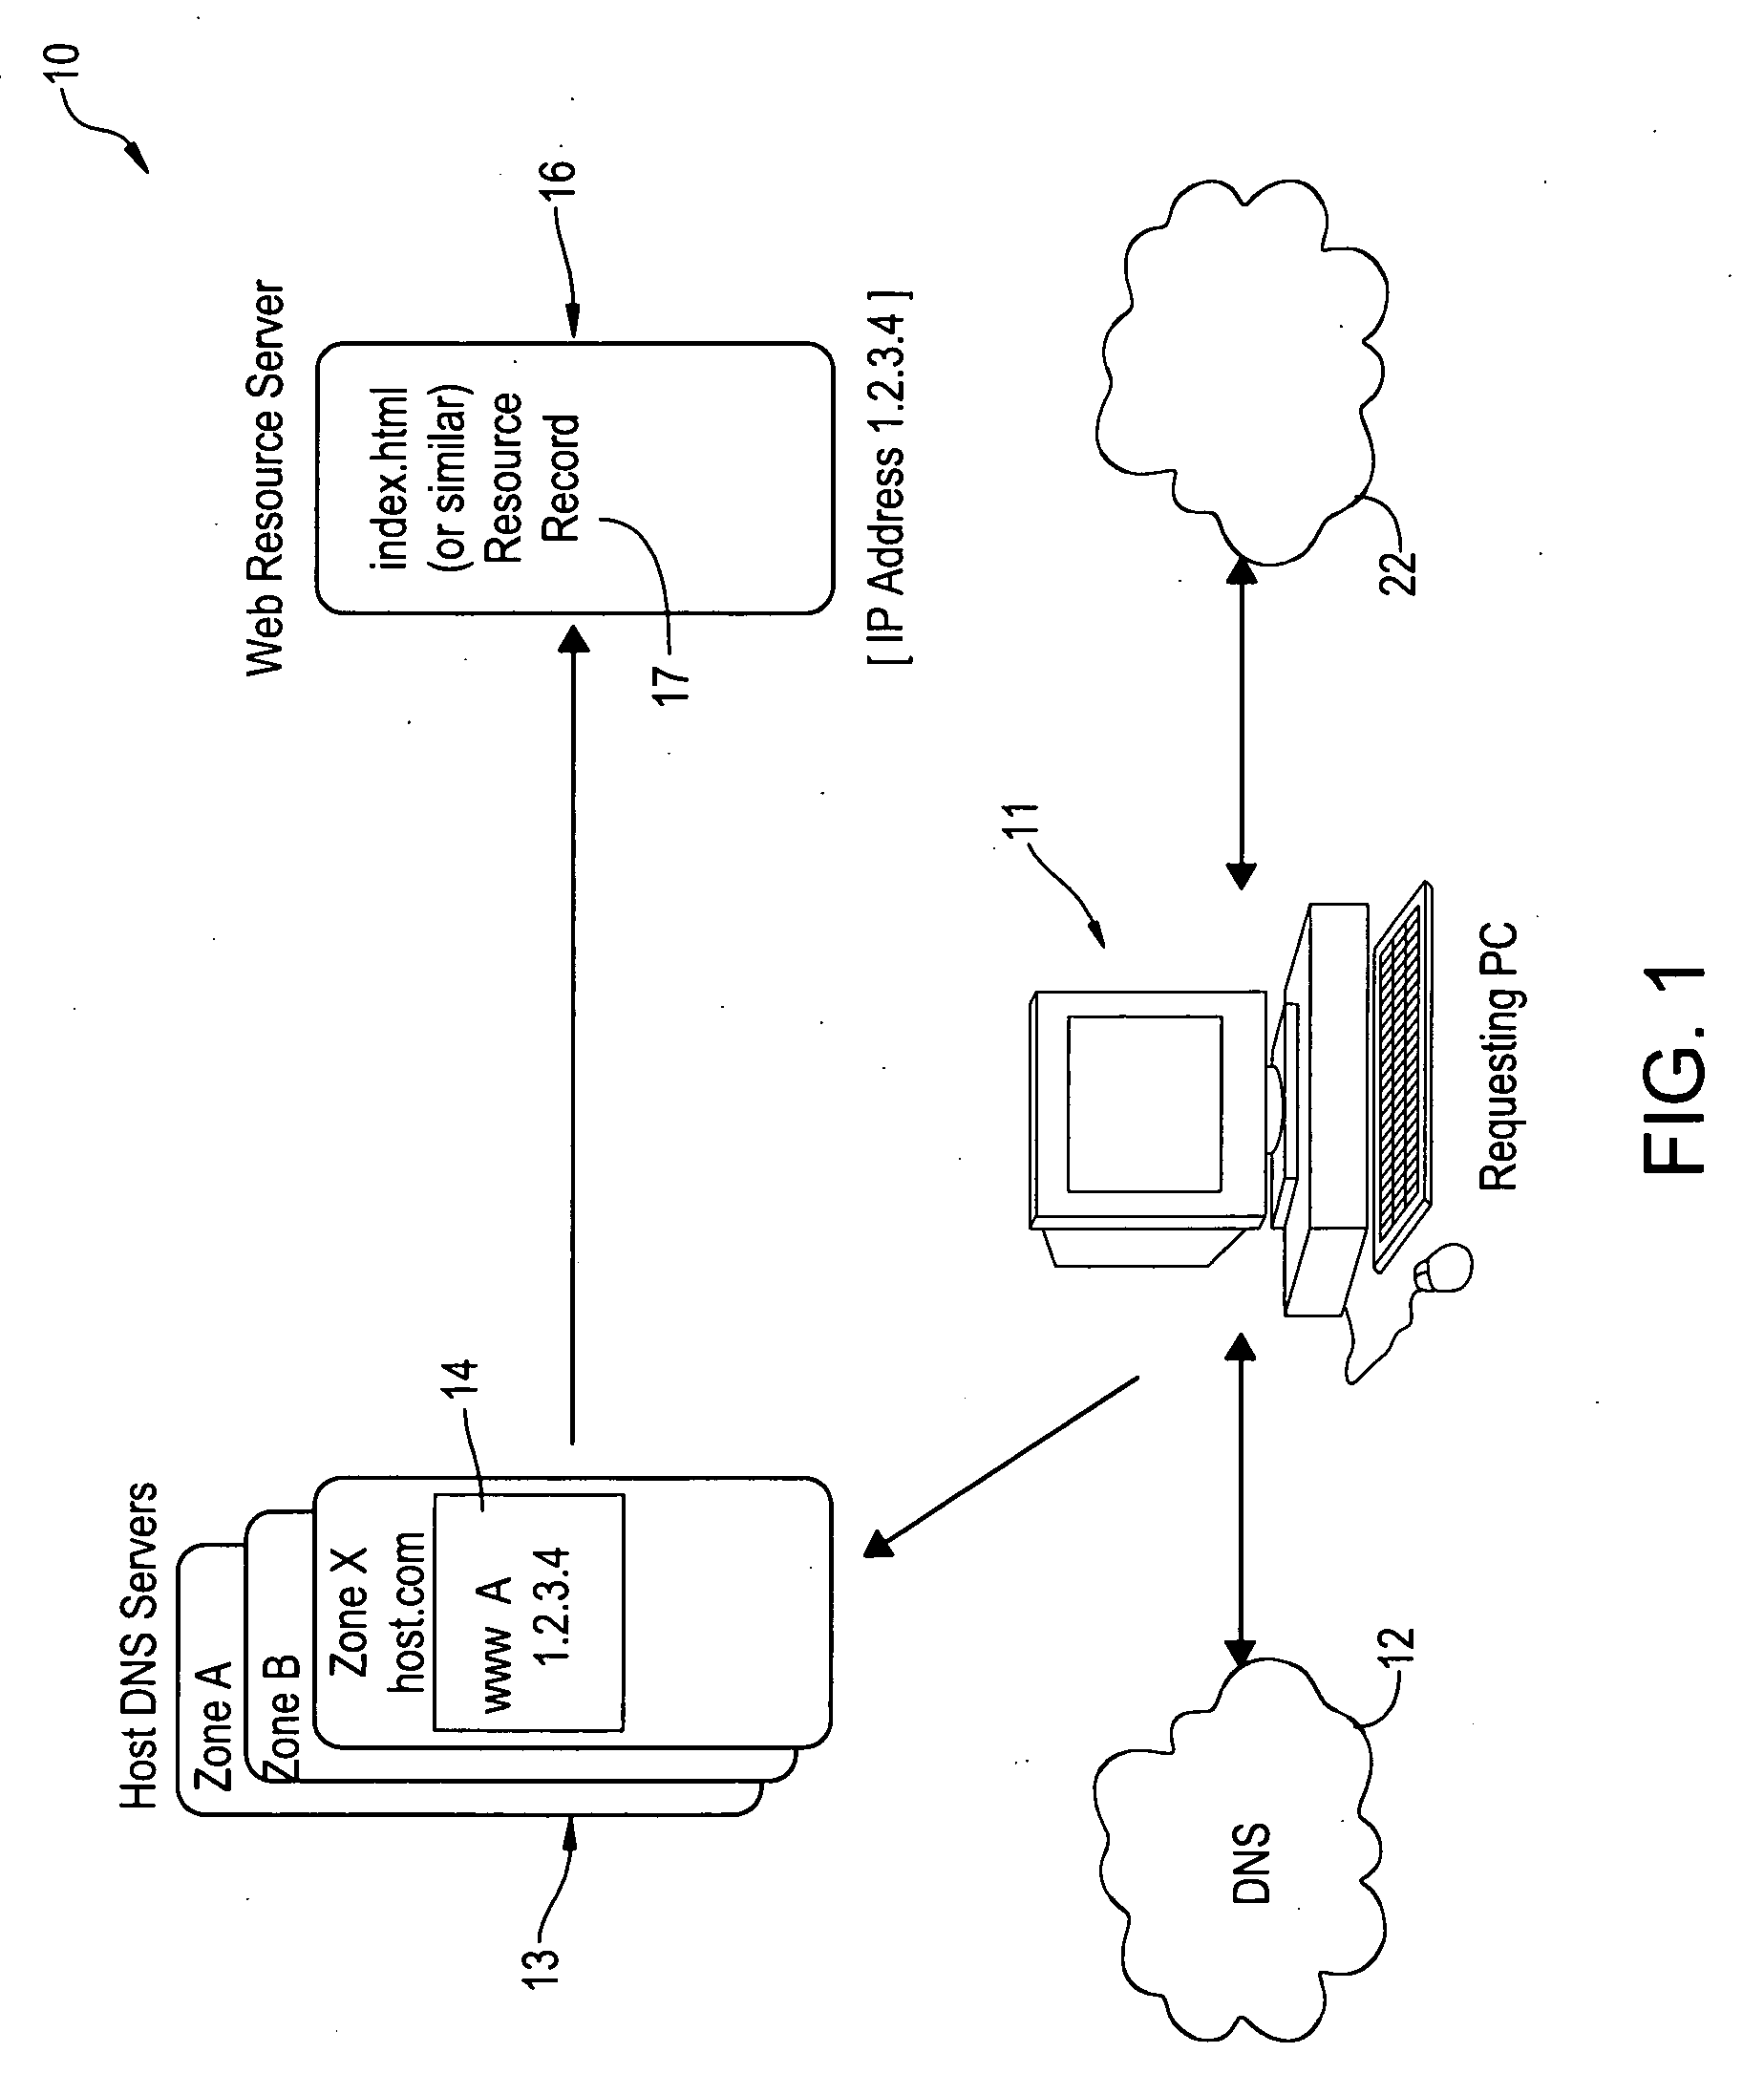 System and Method For Promoting Messages To A Plurality of Websites From A Centralized Authority in Response to A Disaster or Emergency Event